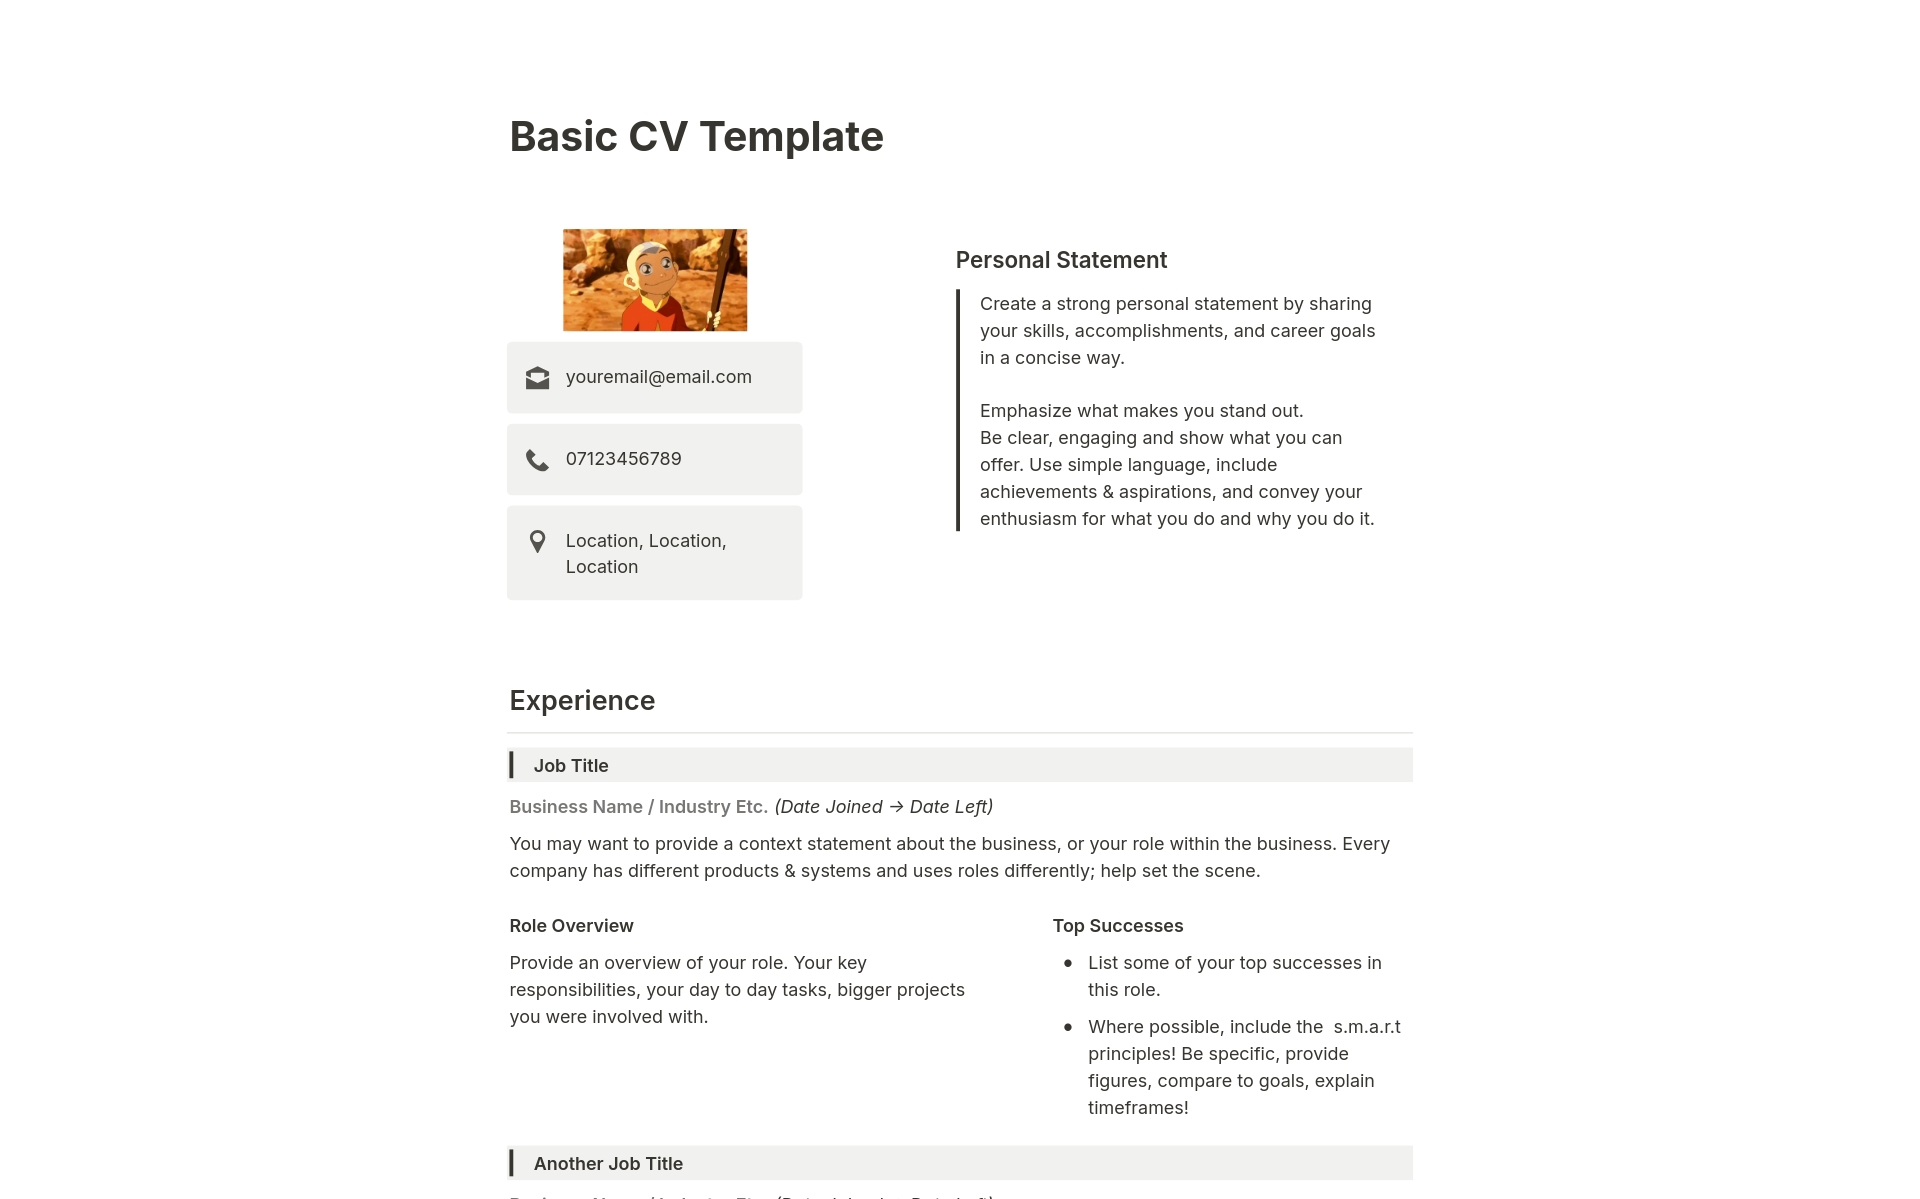 Use this basic resume to apply to jobs. Write a personal statement, list your job experience, education, expertise & passions. Share as a webpage and have an easily updatable resume or download to a pdf to share privately.